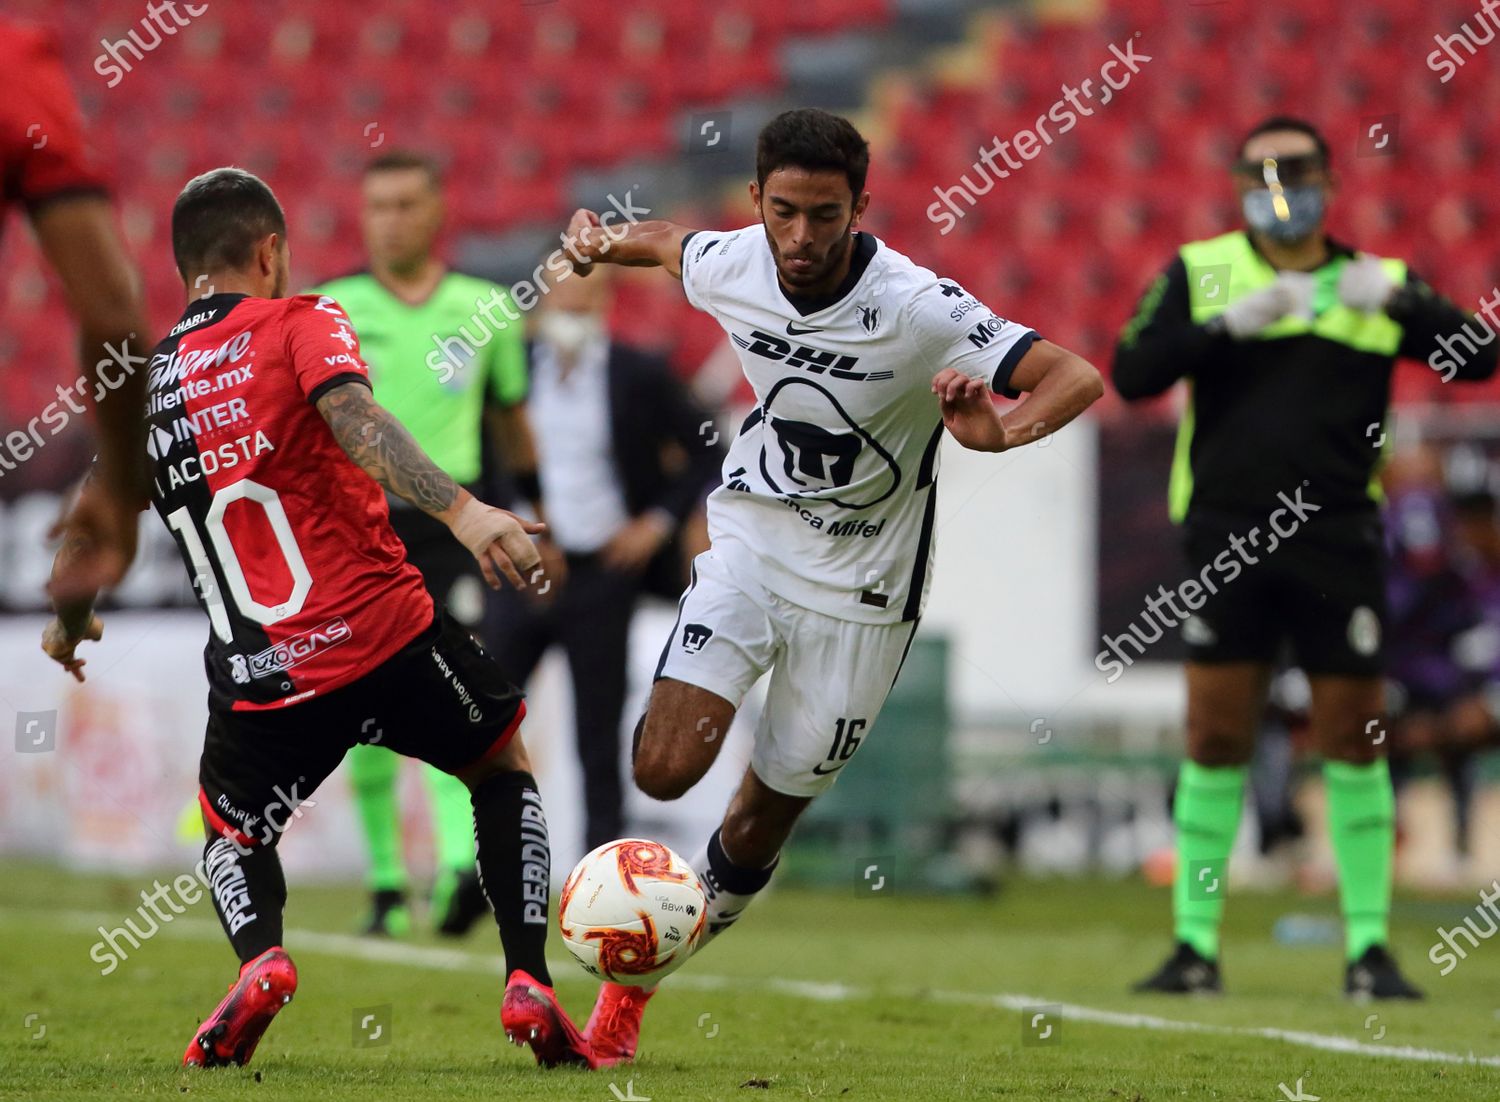 Luciano Acosta L Atlas Action Against Jeronimo Editorial Stock Photo Stock Image Shutterstock